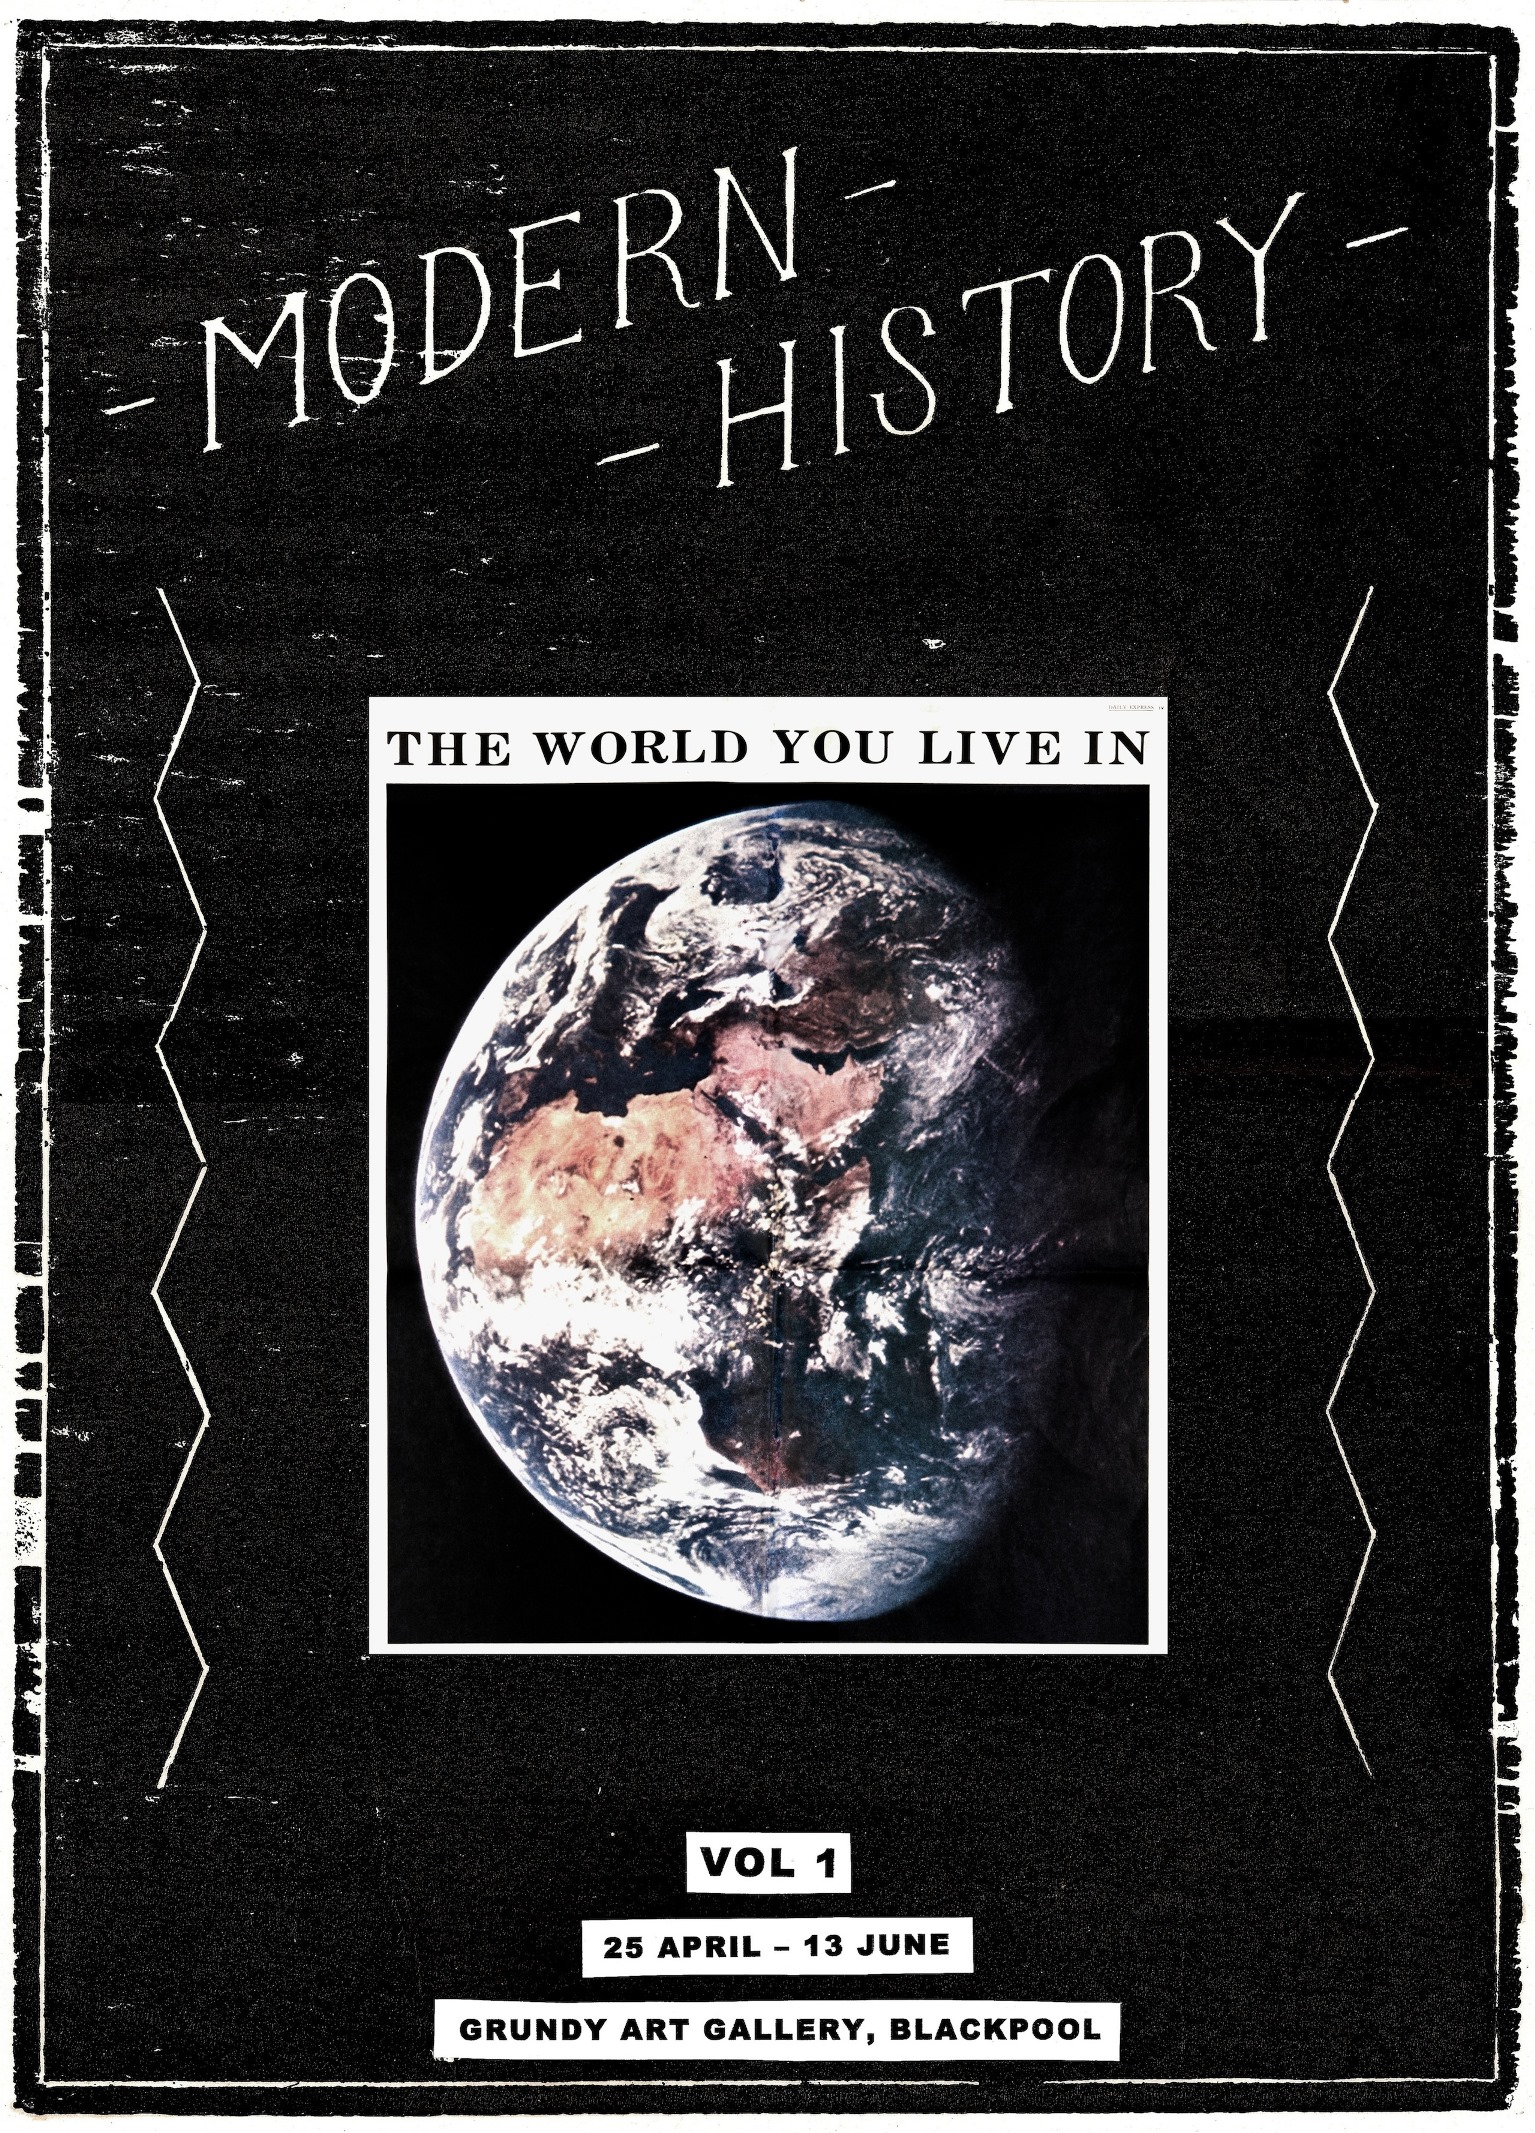 Poster for Modern History exhibition by artist David Osbaldeston. The image is of a photograph of the Earth from space on a black background with the words Modern History, the venue and dates of exhibition in white lettering. The artwork was included in the exhibition Pre-Pop To Post-Human: Collage In The Digital Age.